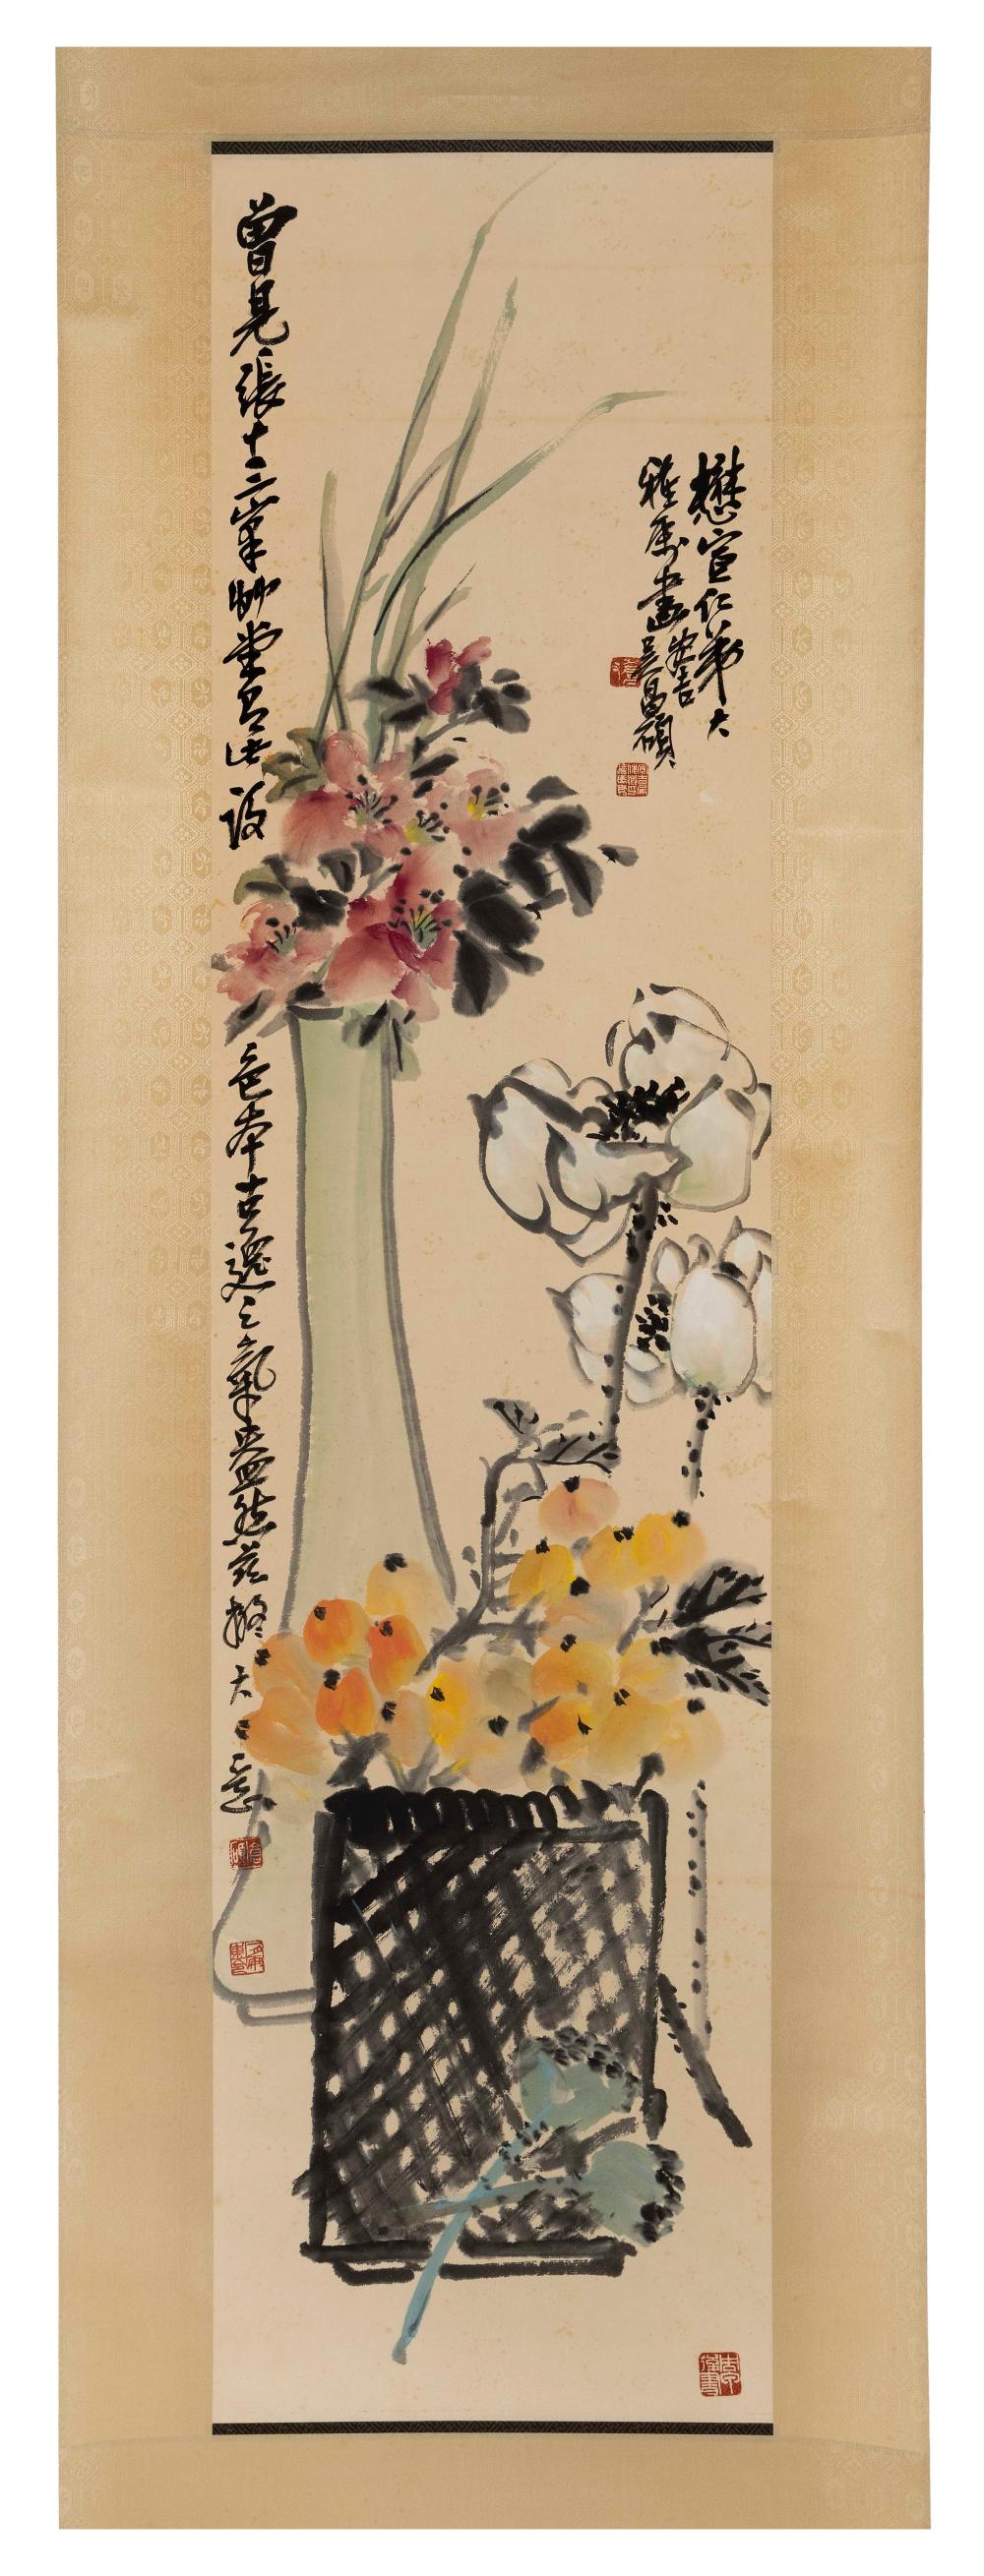 CHINESE SCROLL PAINTING EARLY 20TH